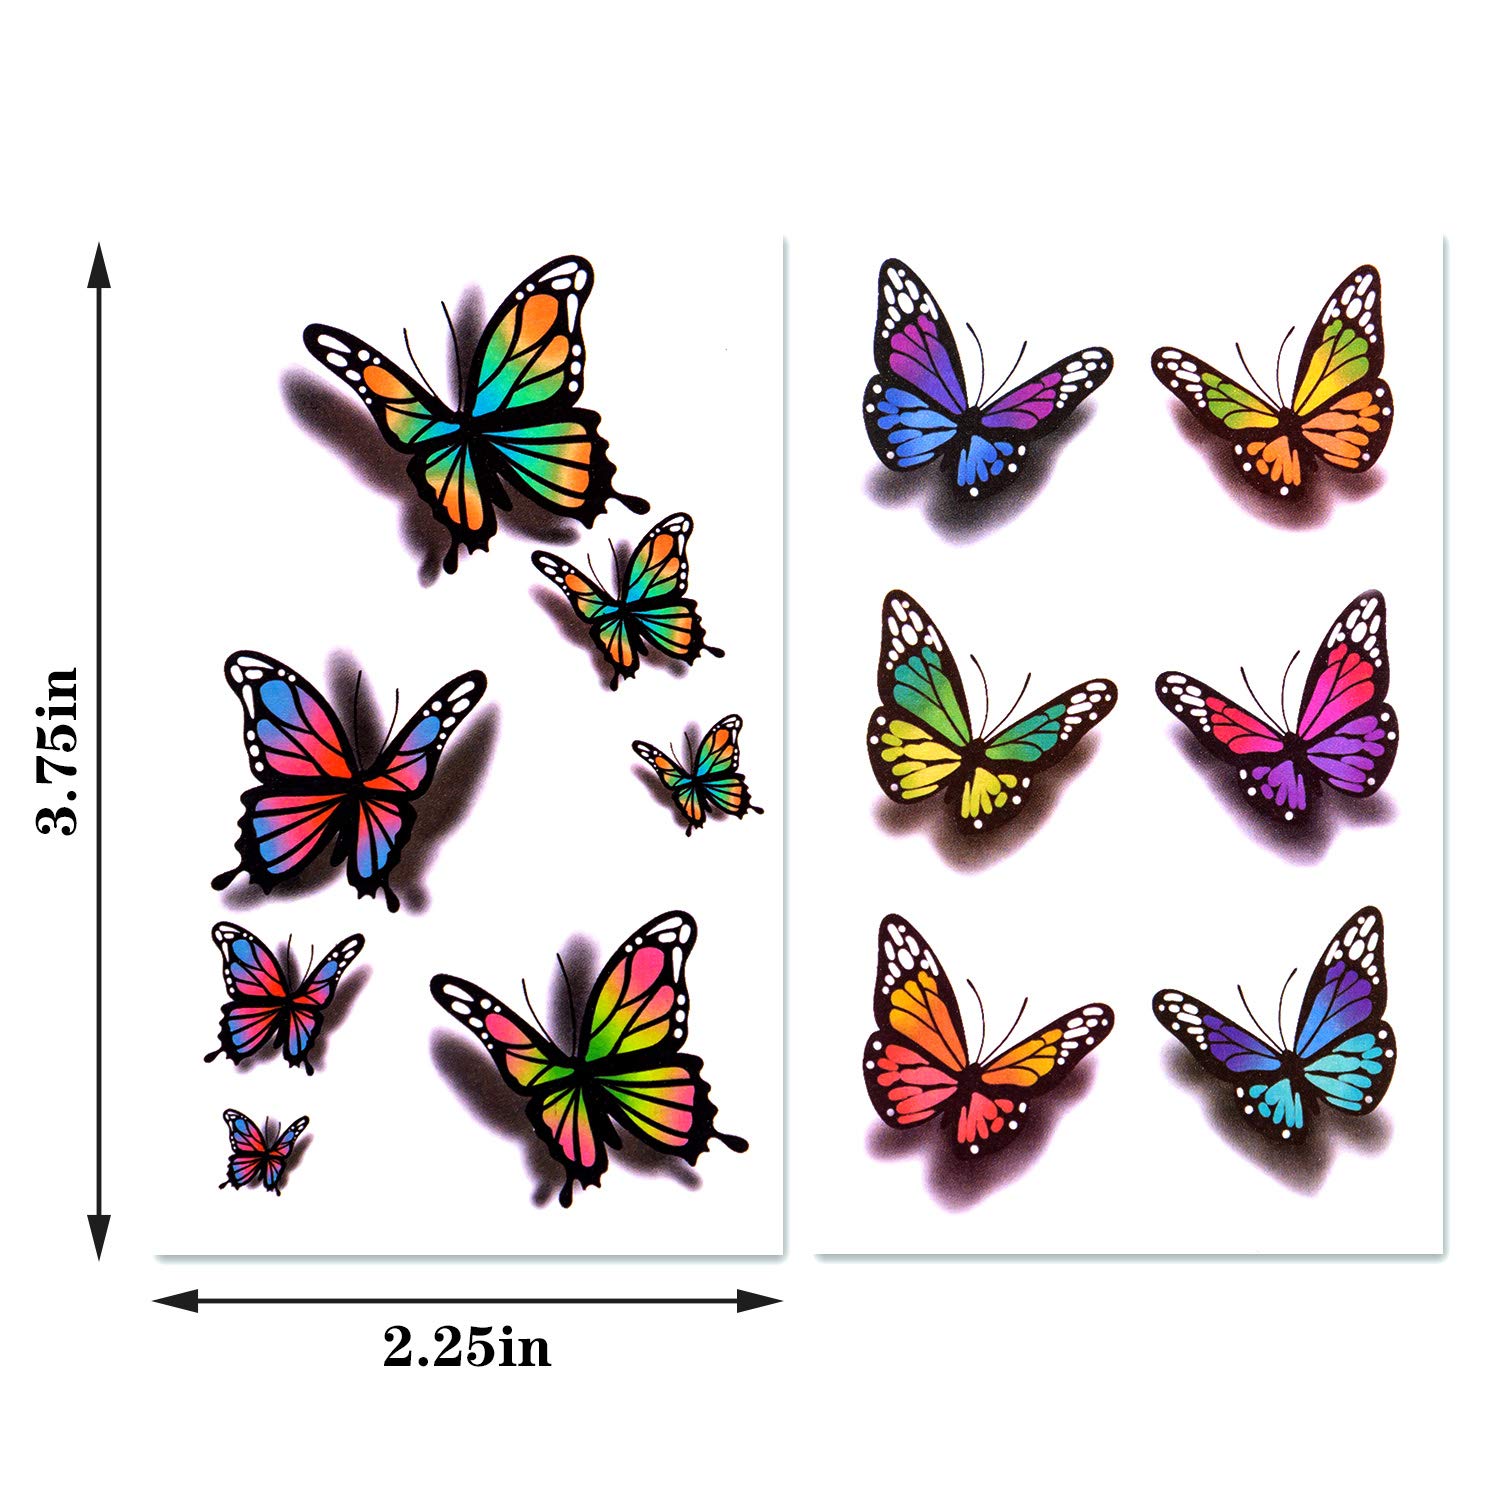 3D Butterflies and Flowers Temporary Stickers Tattoo, Colorful Body Art Tattoos for Women Kids, 126Pcs